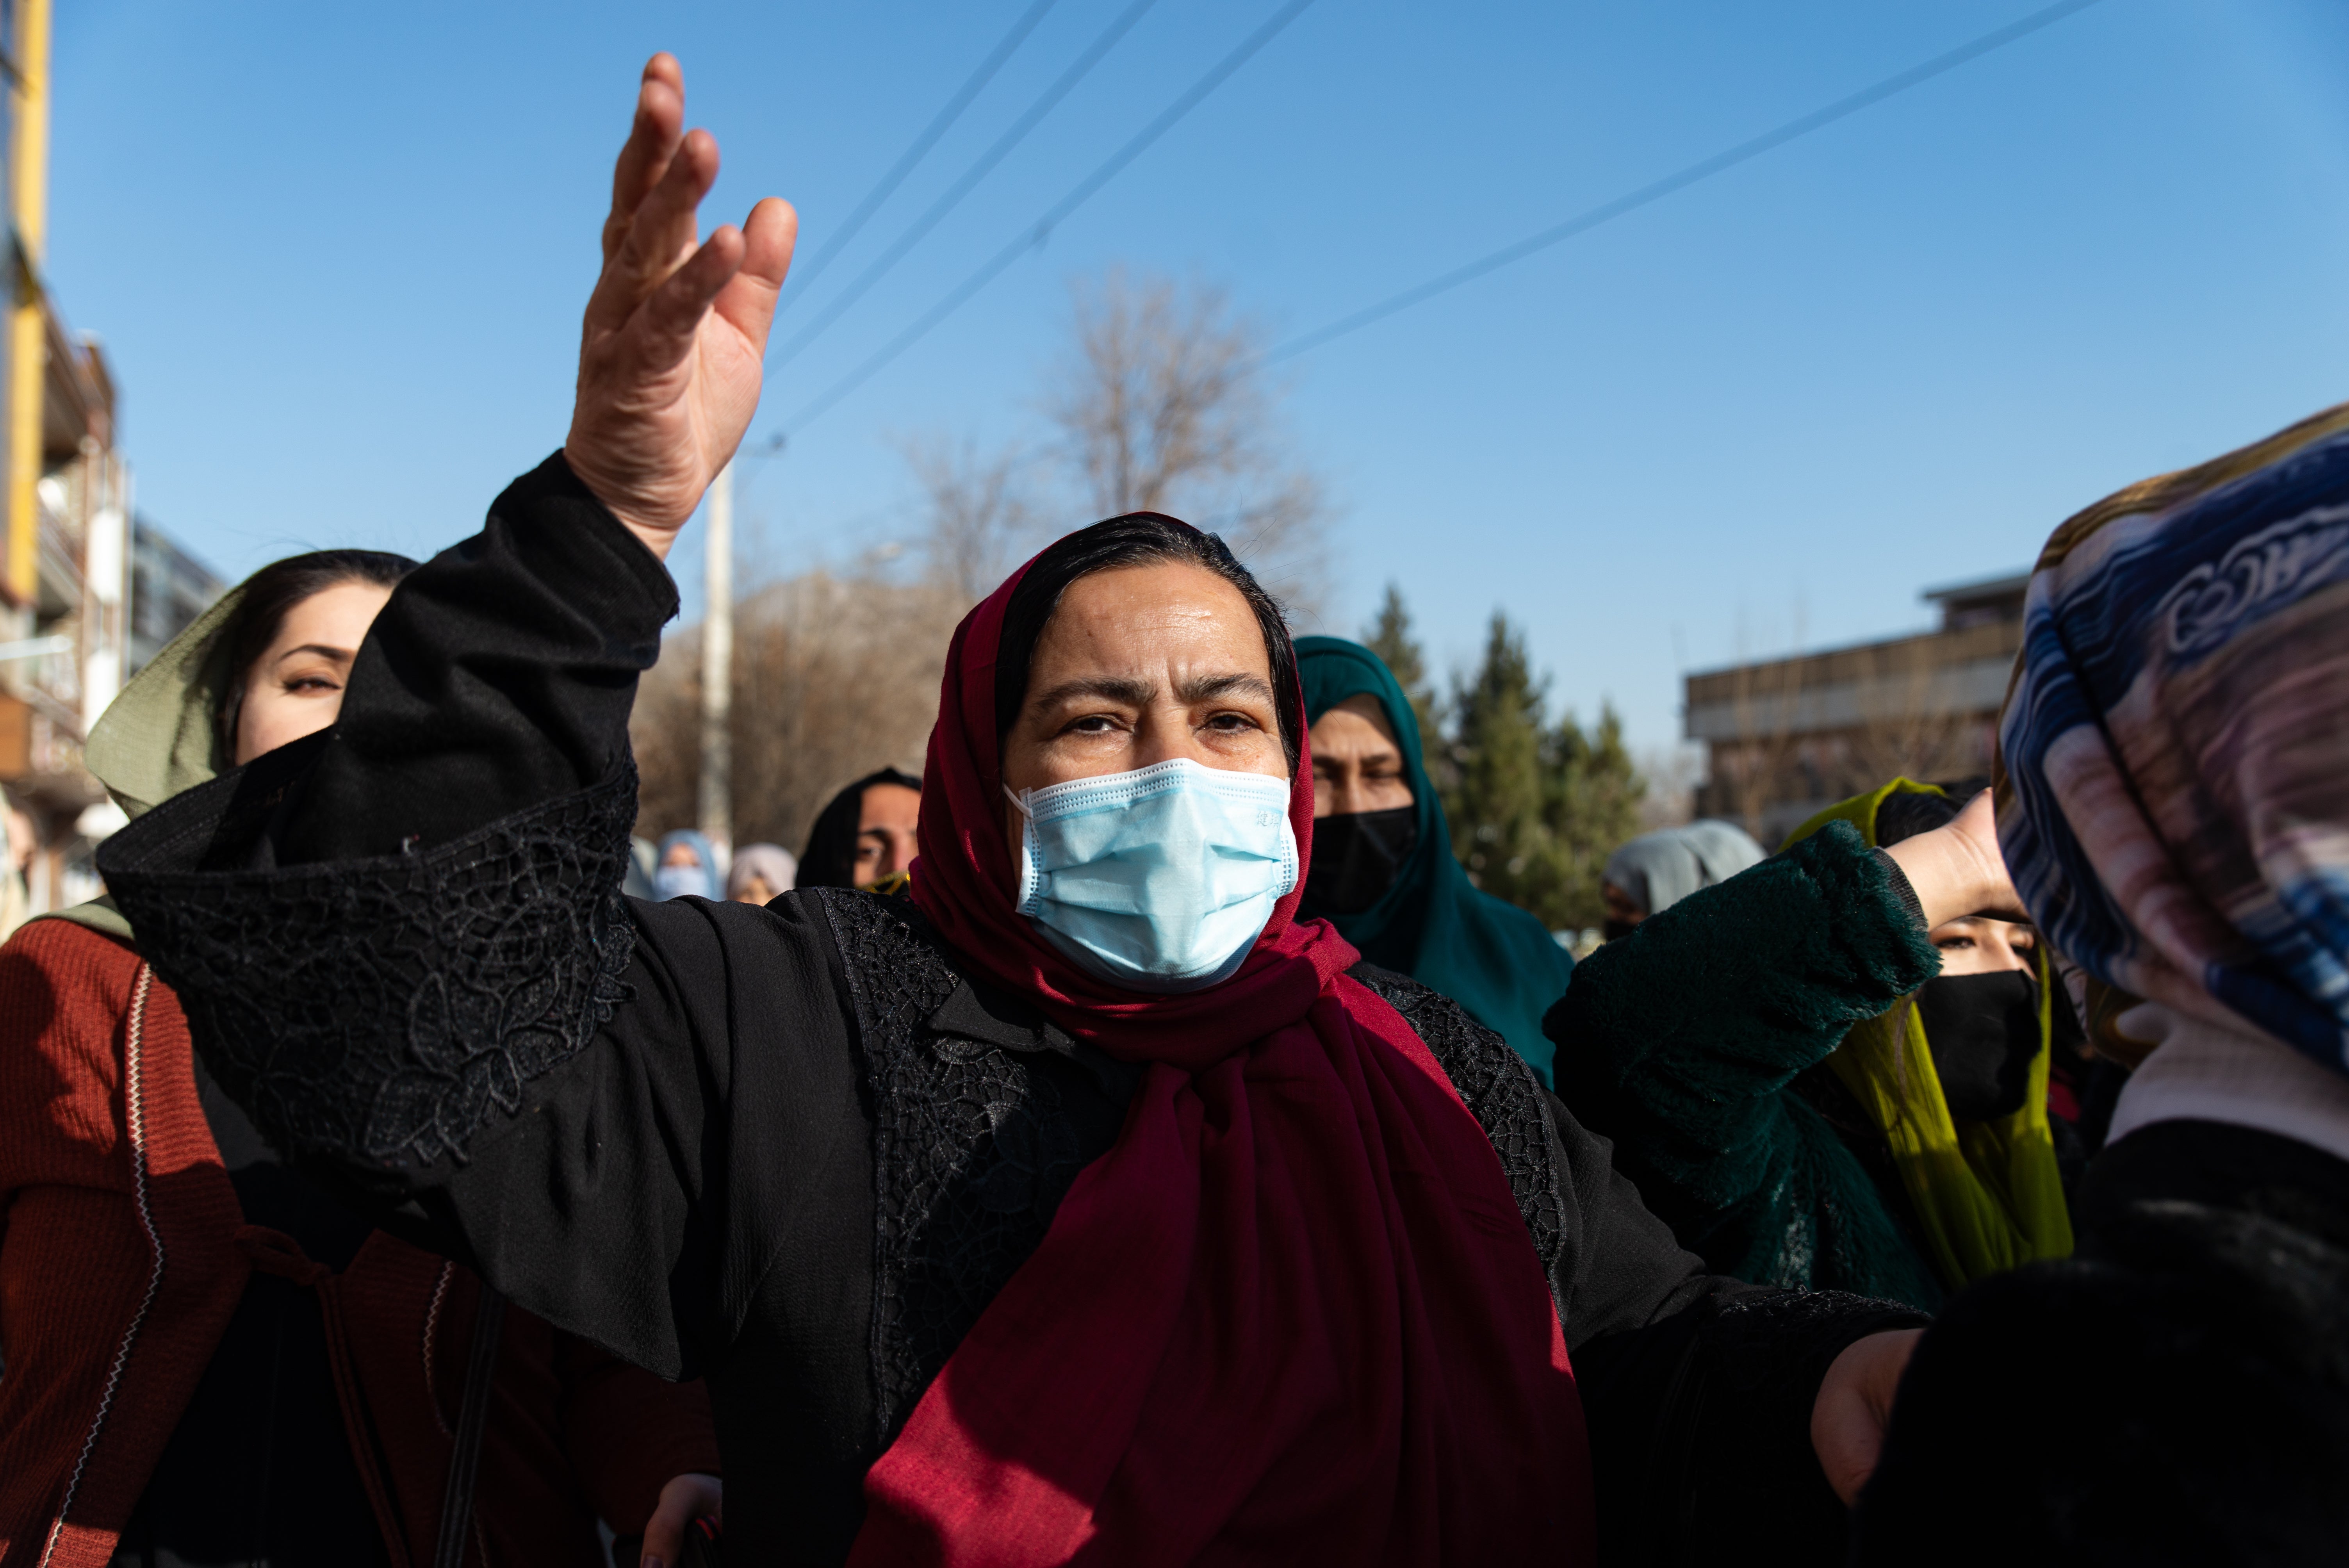 Women protest against the new Taliban ban on women accessing university education on Thursday